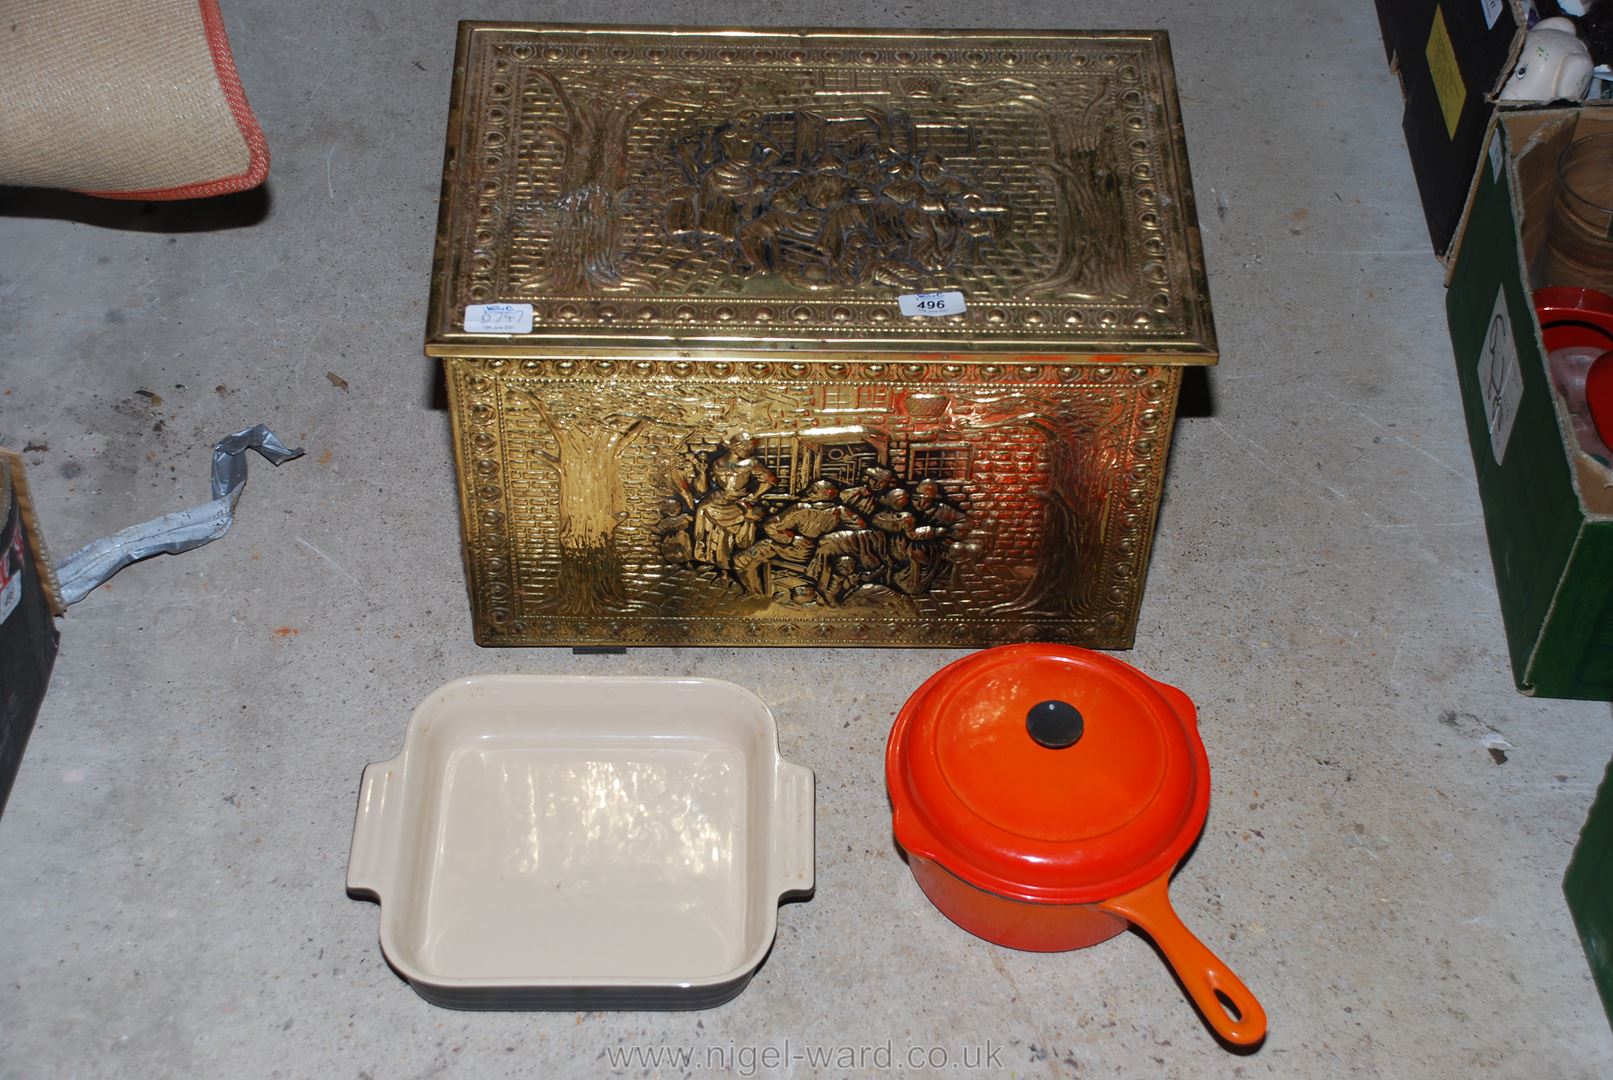 A Le Creuset 20 cm saucepan and lid, baking dish and brass coal box.